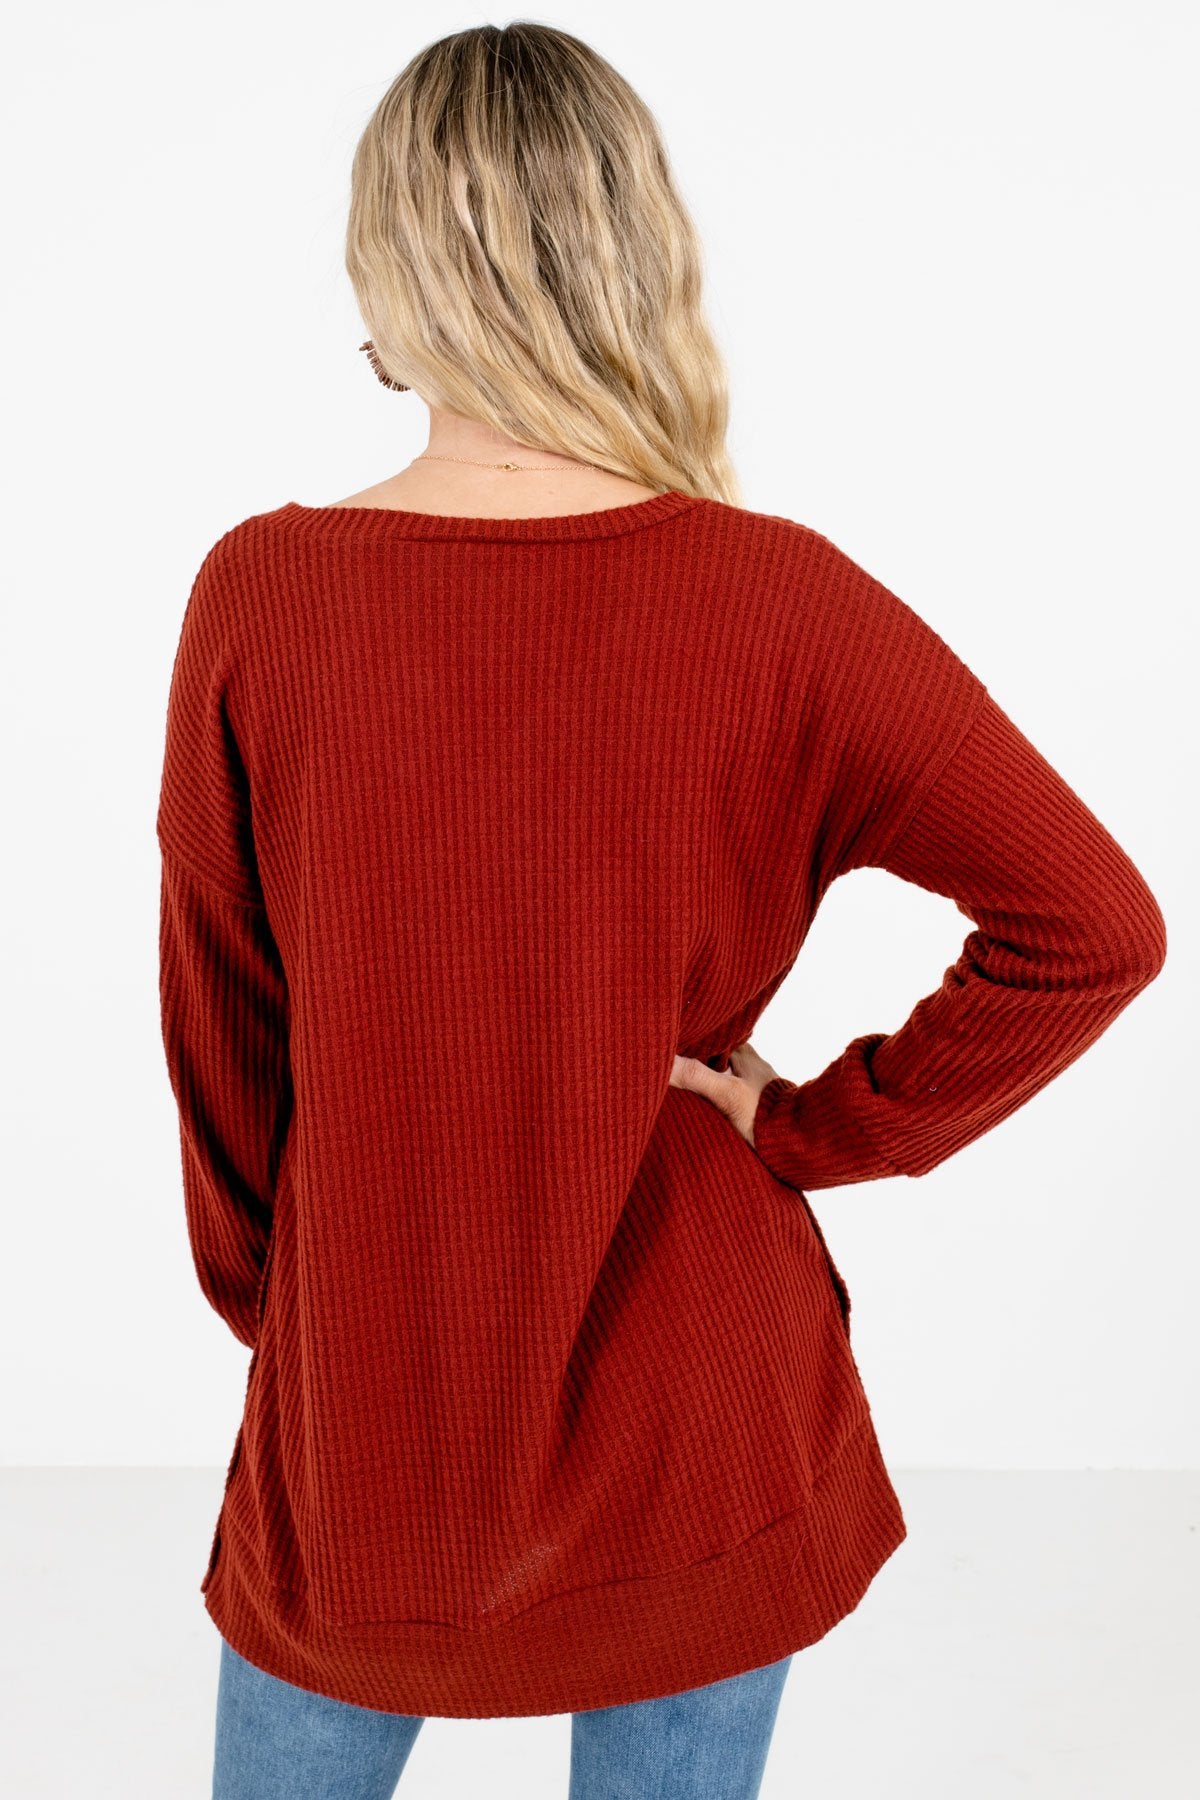 Women’s Rust Red Button-Up Sides Boutique Top